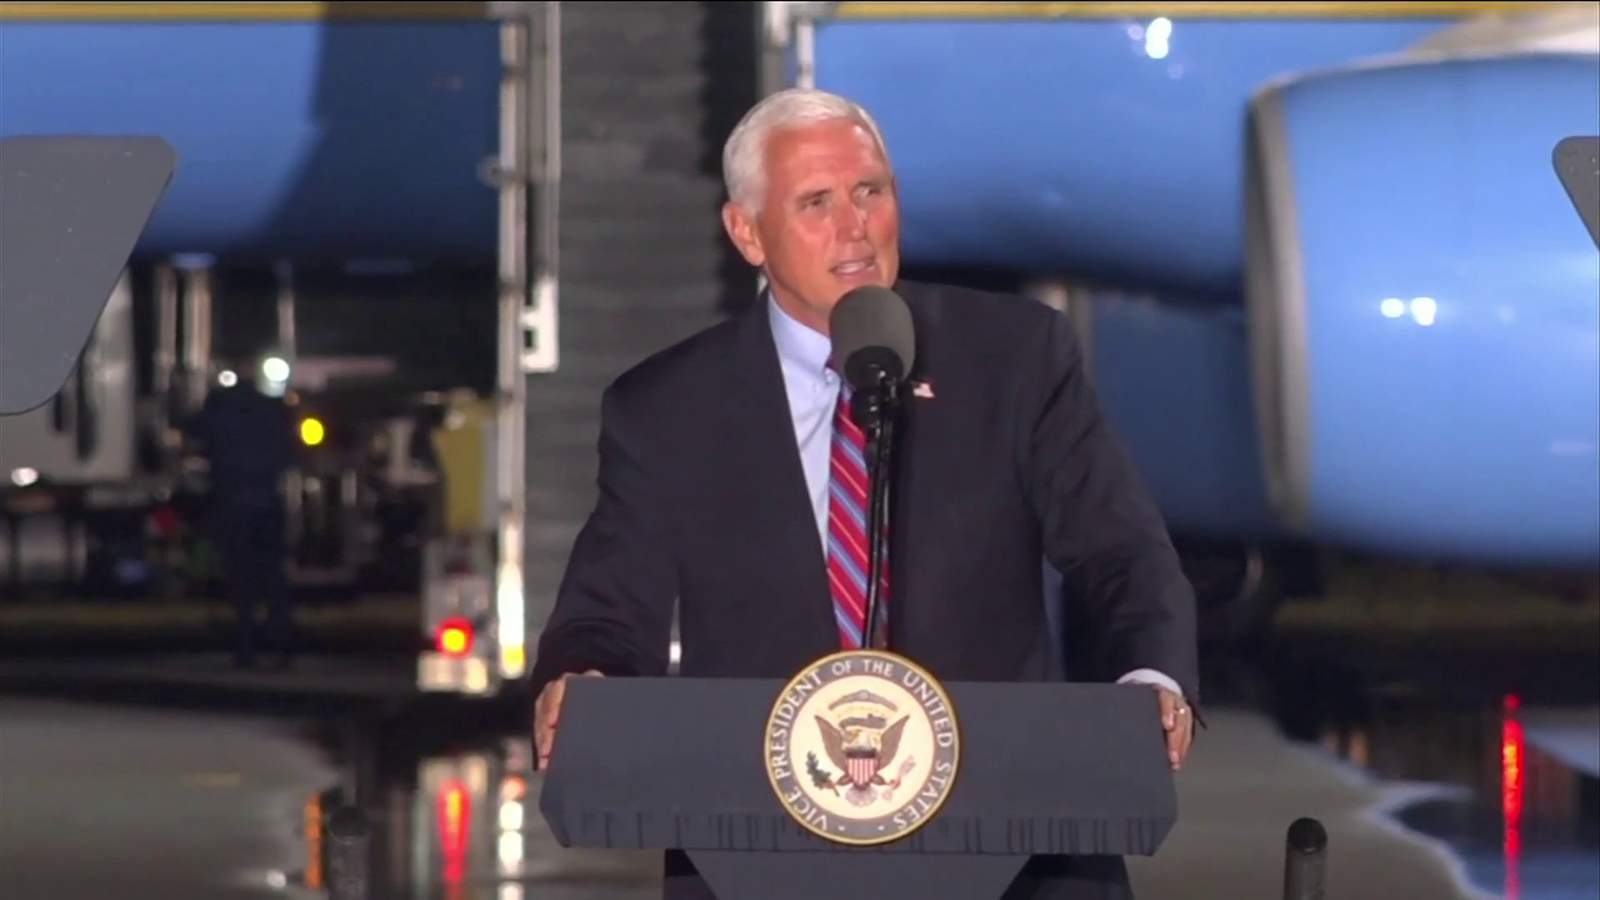 Pence makes pitch to voters with rally in Tallahassee